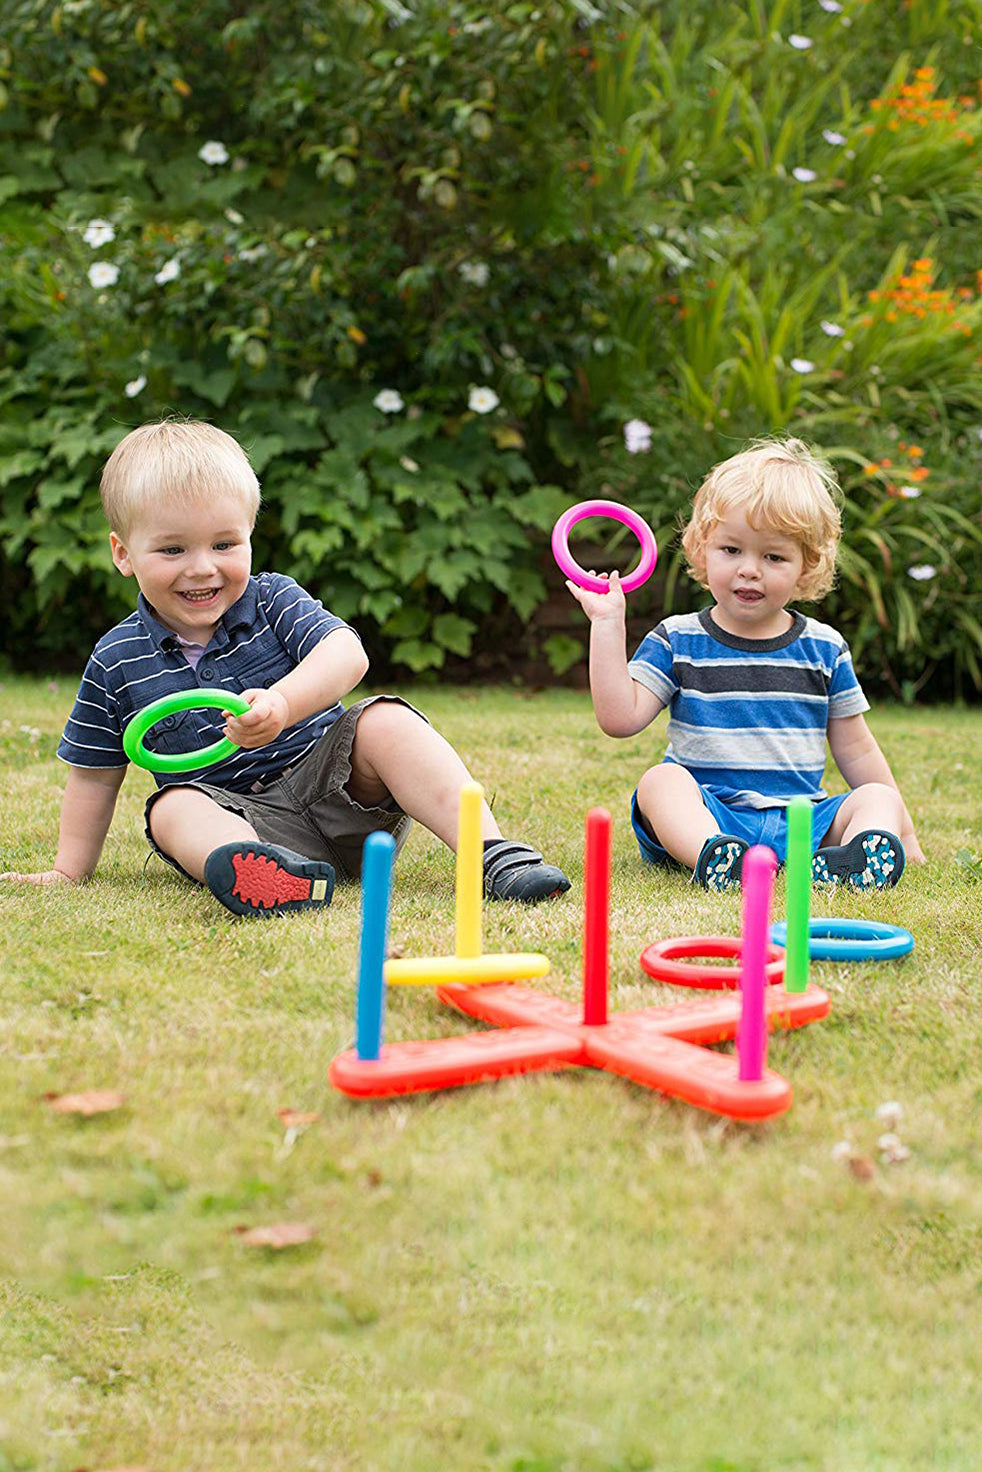 Ring Toss Game For Kids - 16 cm (6.3 inch) and 14.5 cm (5.7 inch) Rings